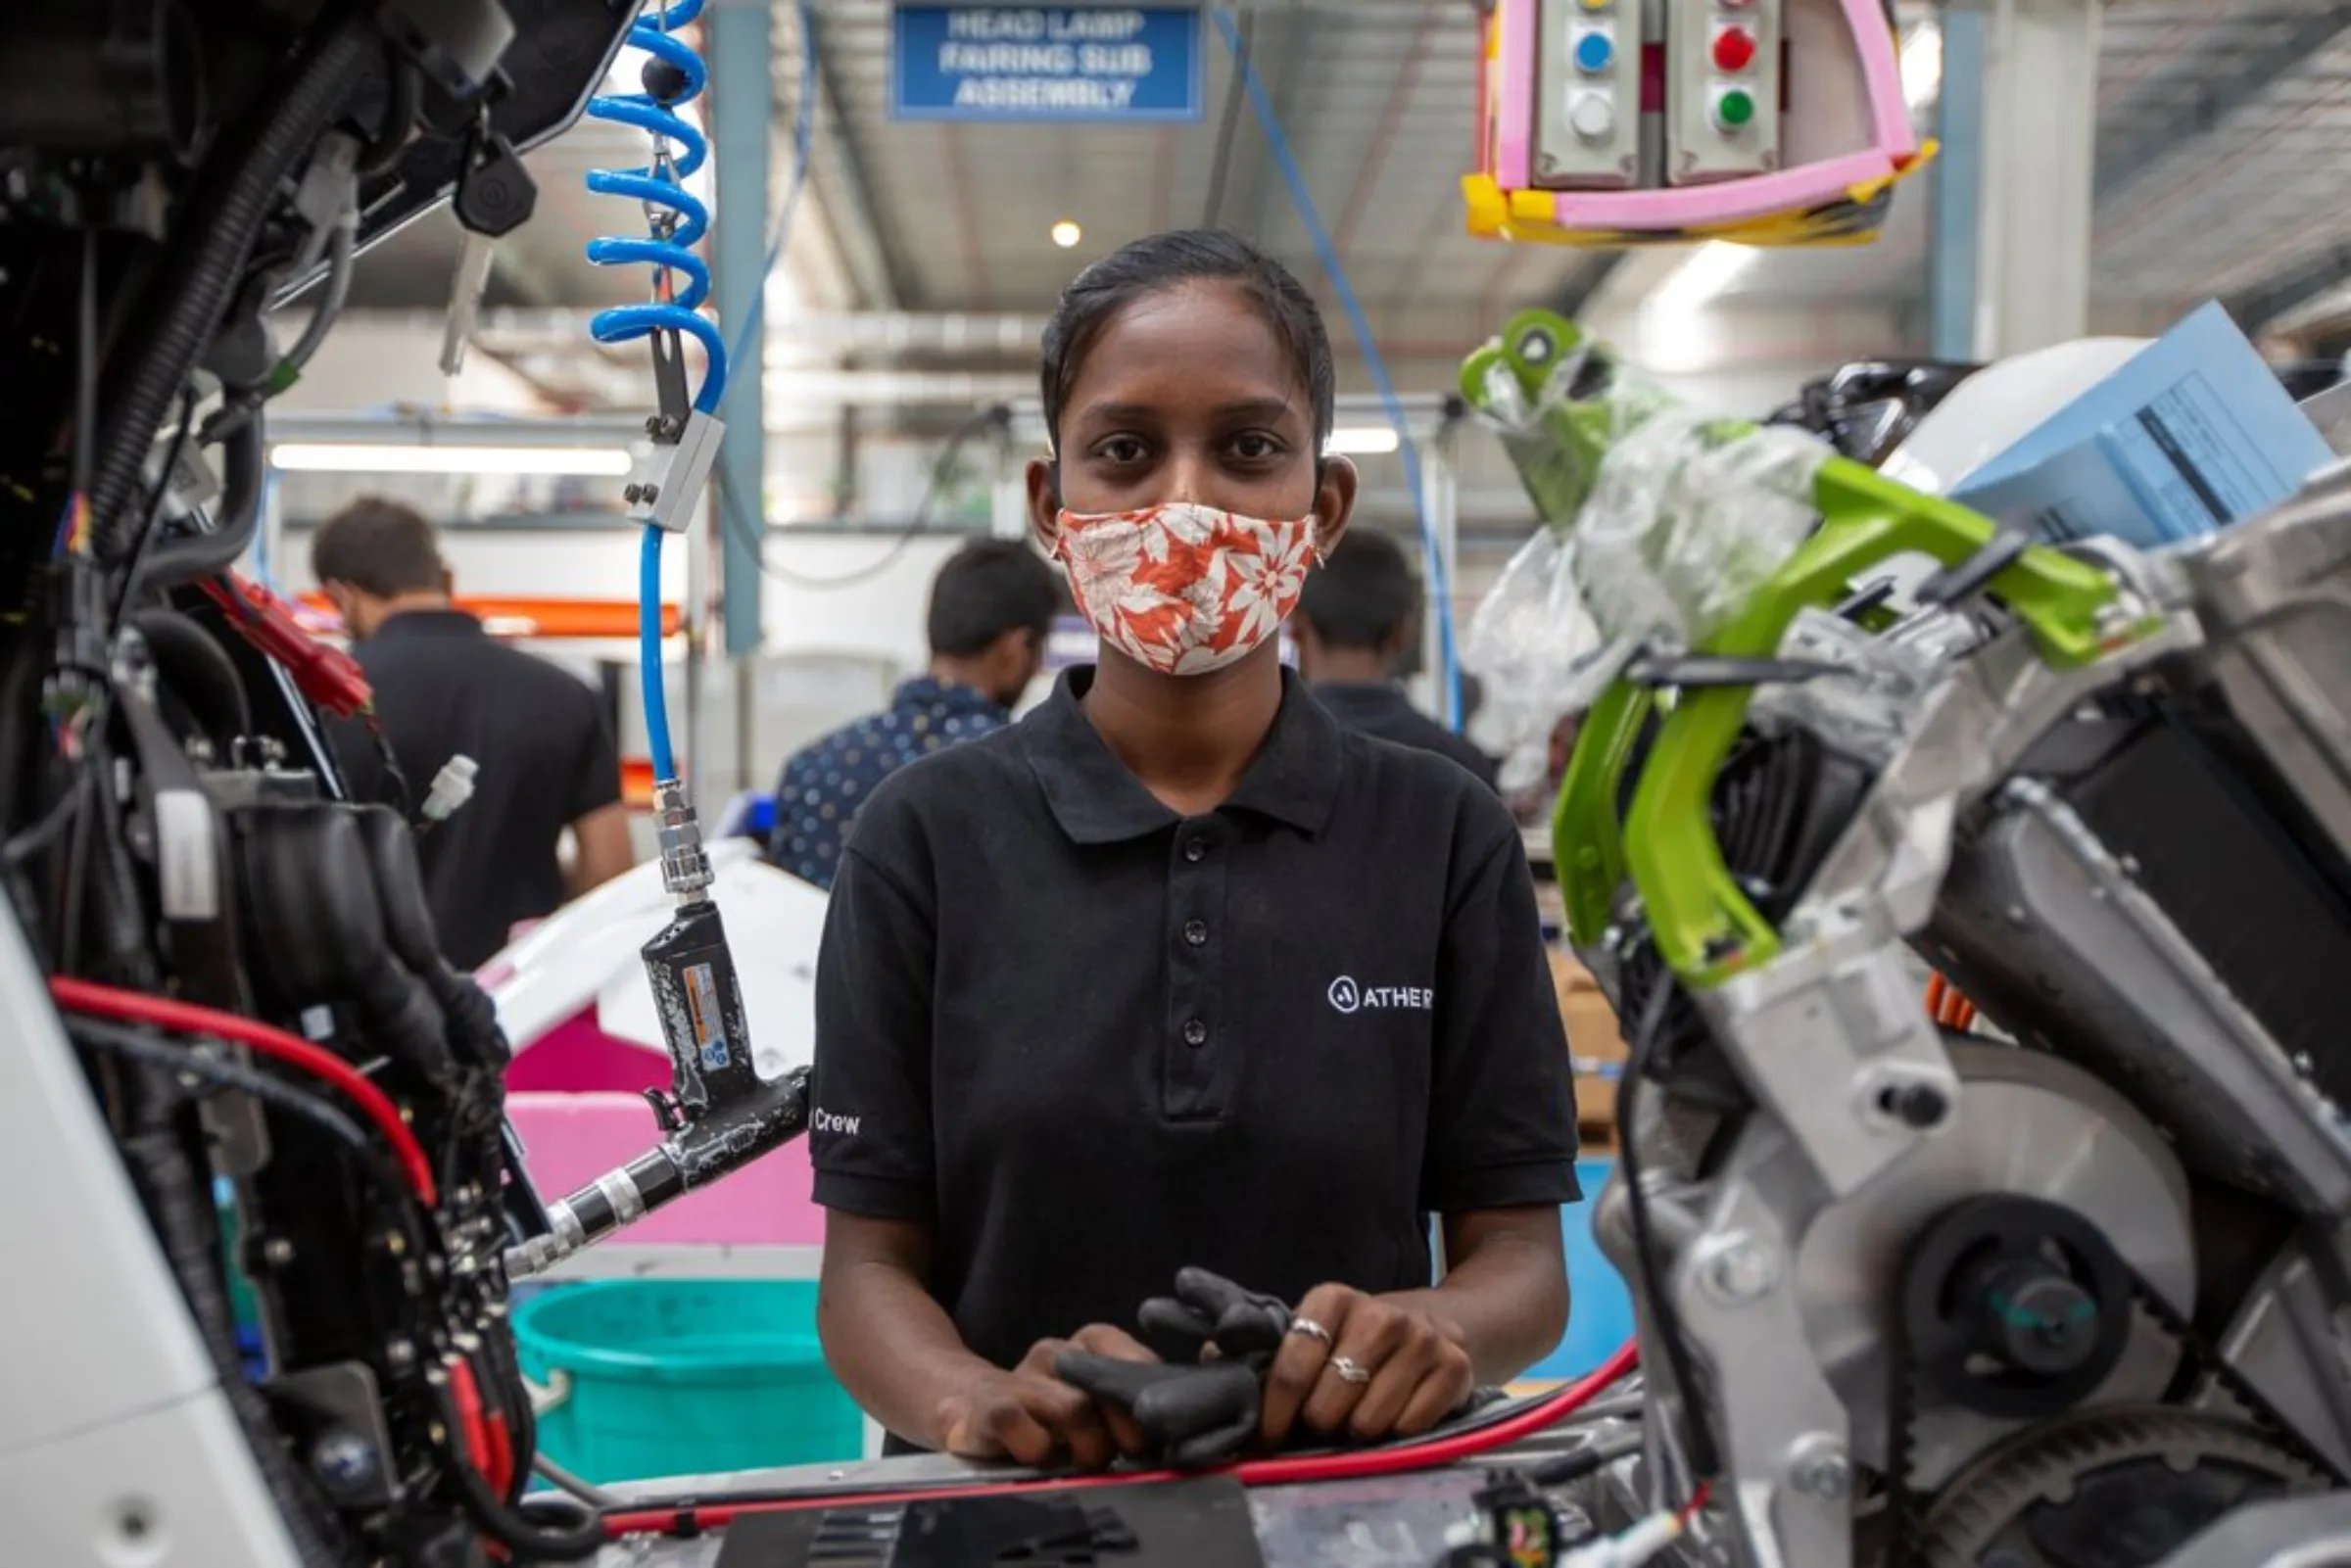 Workers assemble electric scooters at the Ather Energy factory in Hosur, India, April 20, 2022